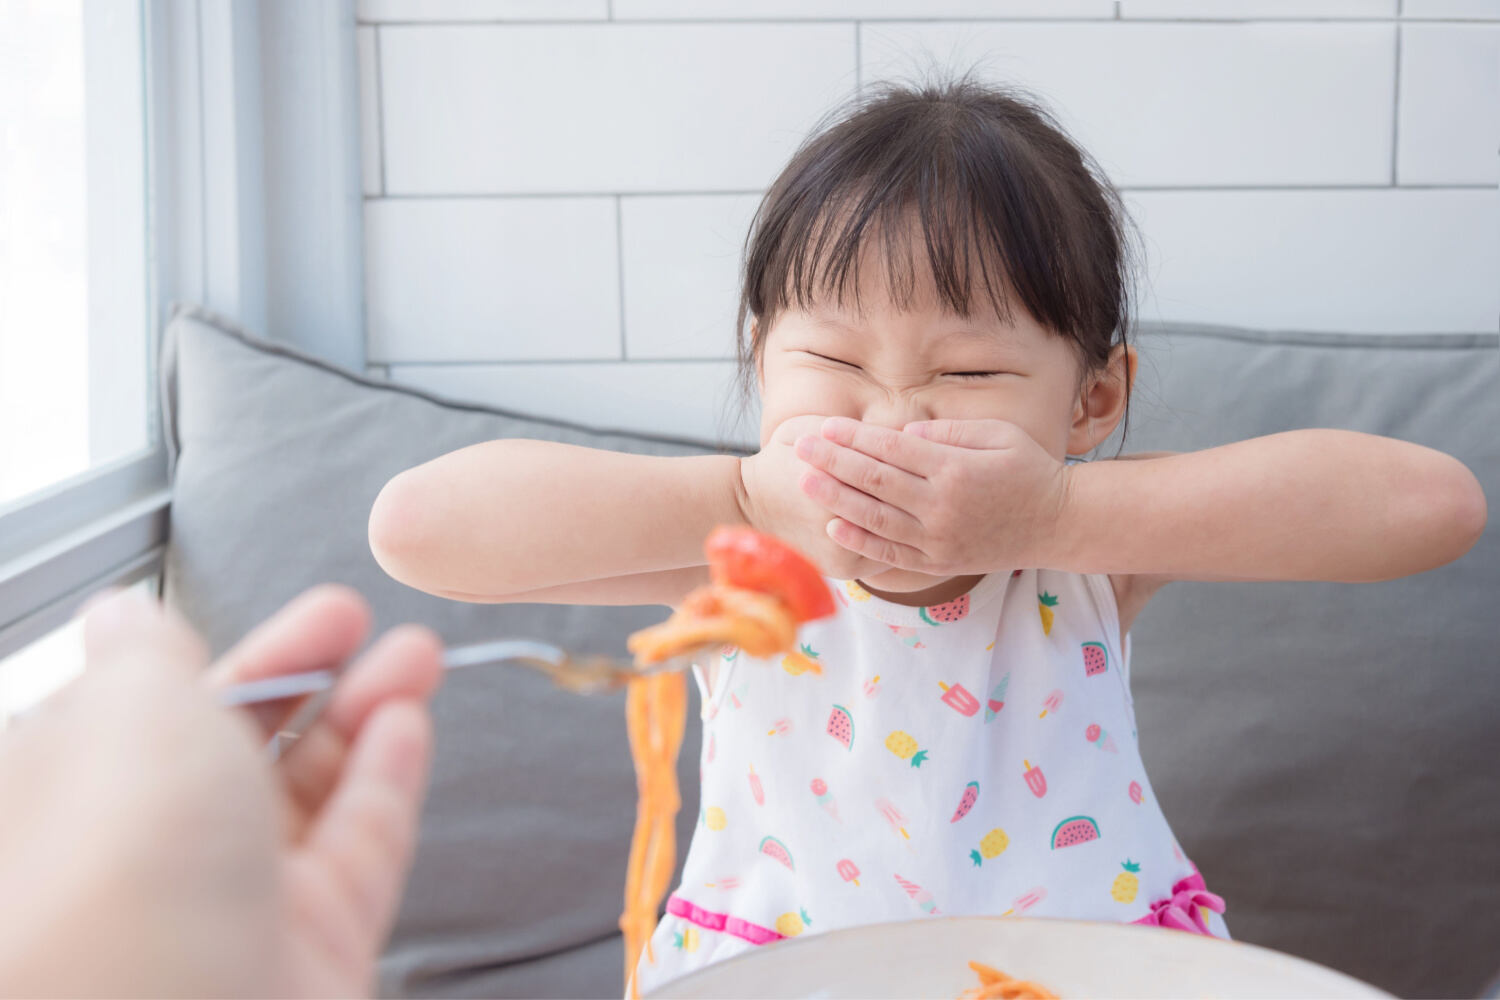 A toddle girl closing her mouth to avoid eating